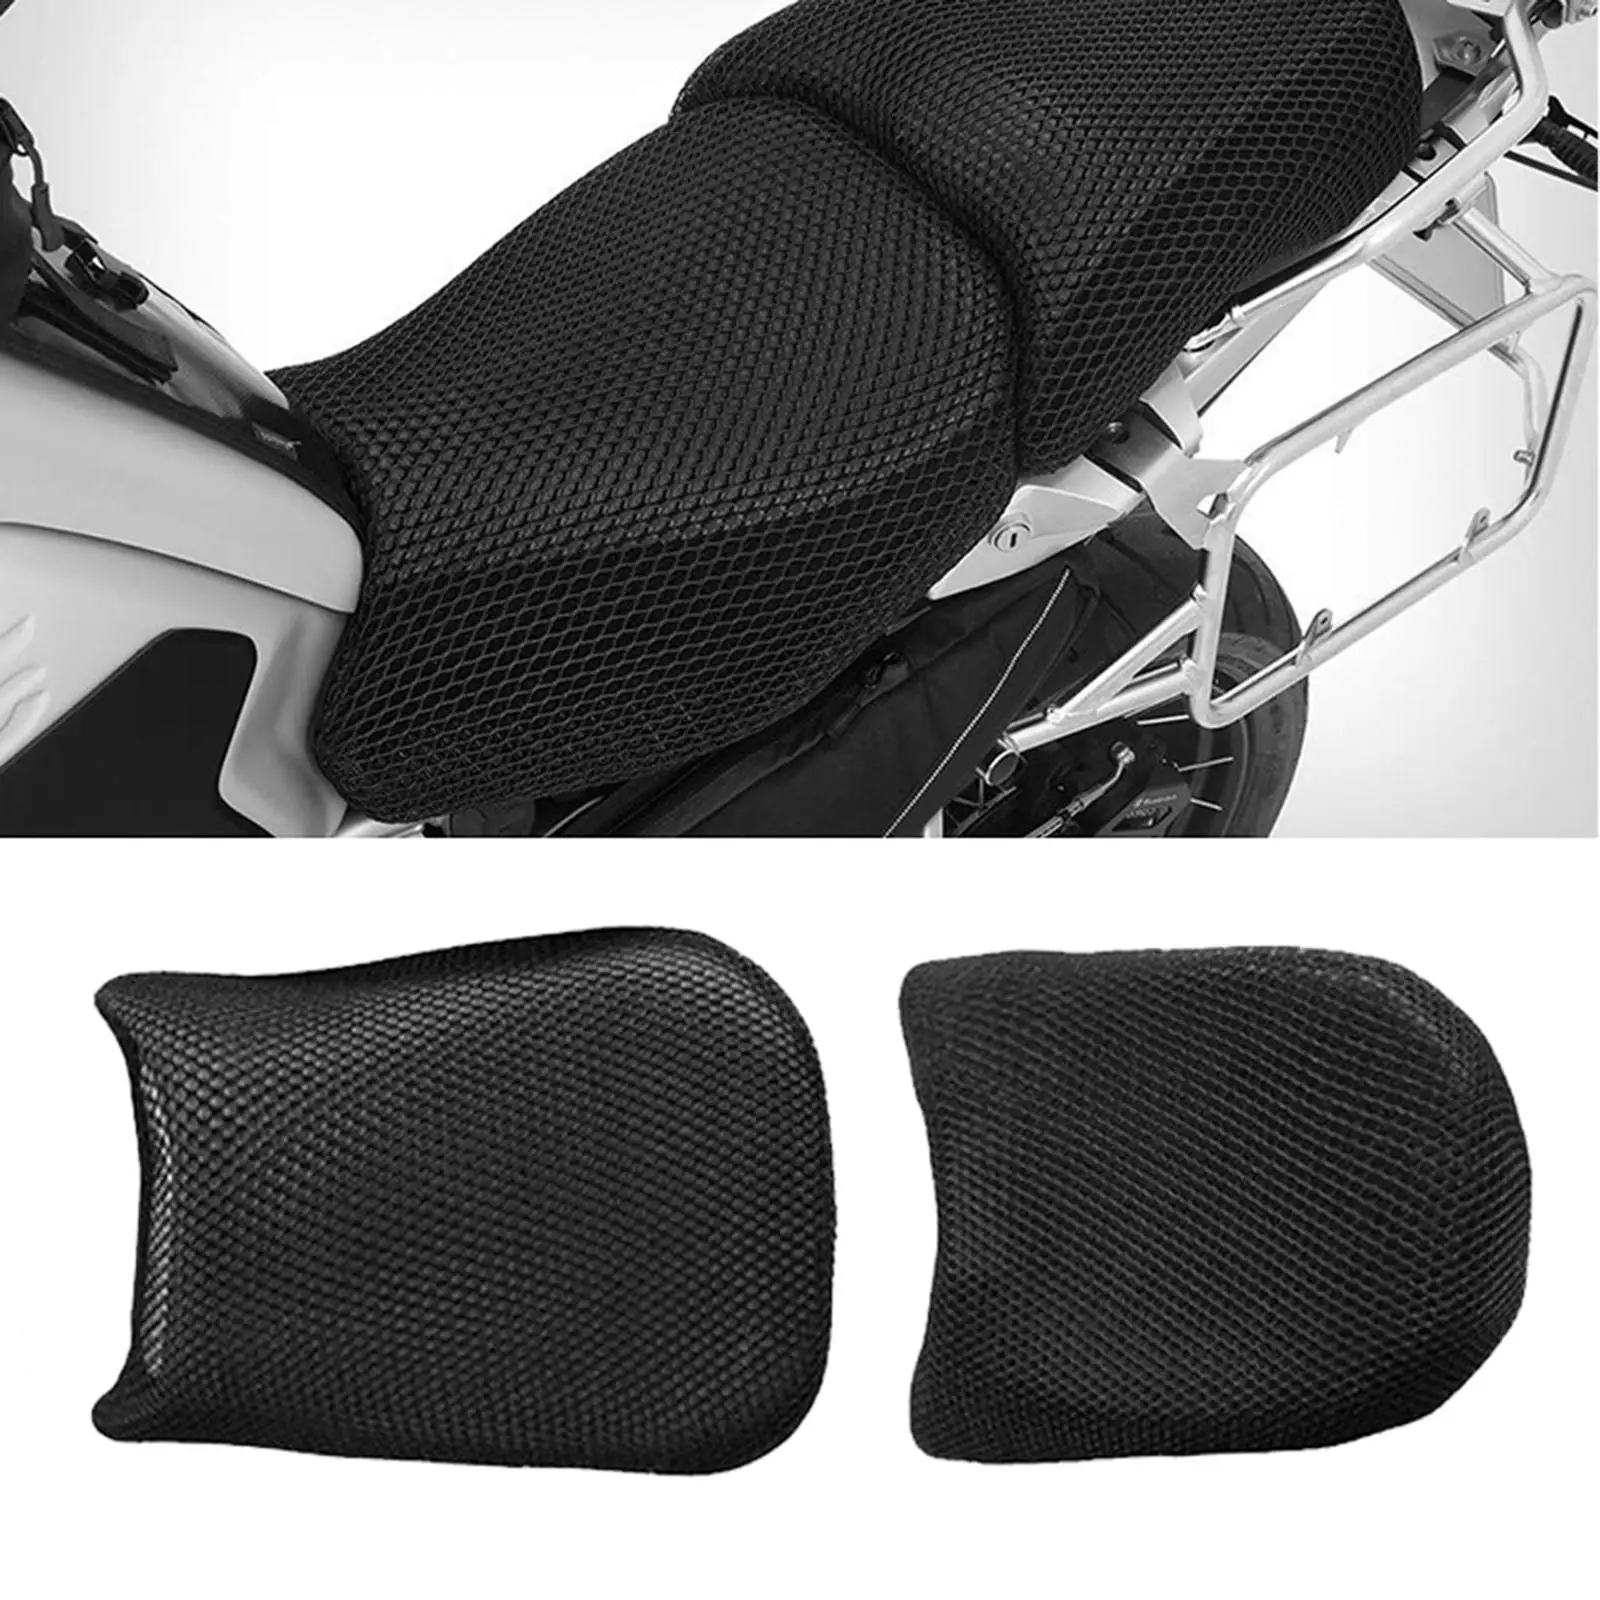 Motorbike Motorcycle Protecting 3D Comfort Saddle Seat Cushion Pad Cover